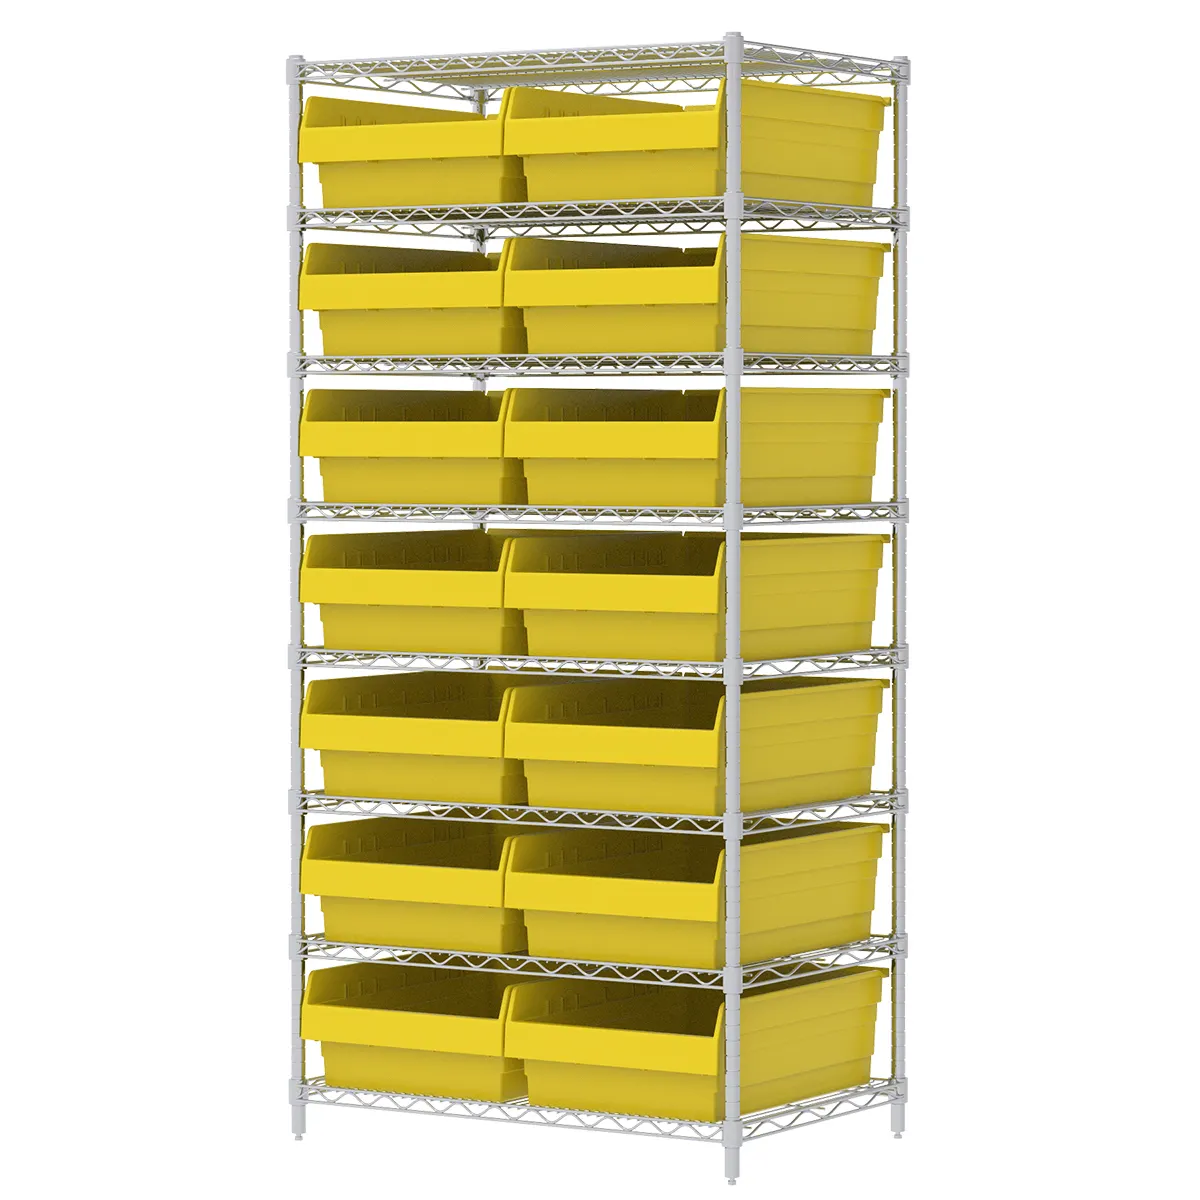 Industrial Wire Plastic Storage Picking Part Box Shelf Rack Bin for Nuts Bolts Tool Hardware Organizer Solutions